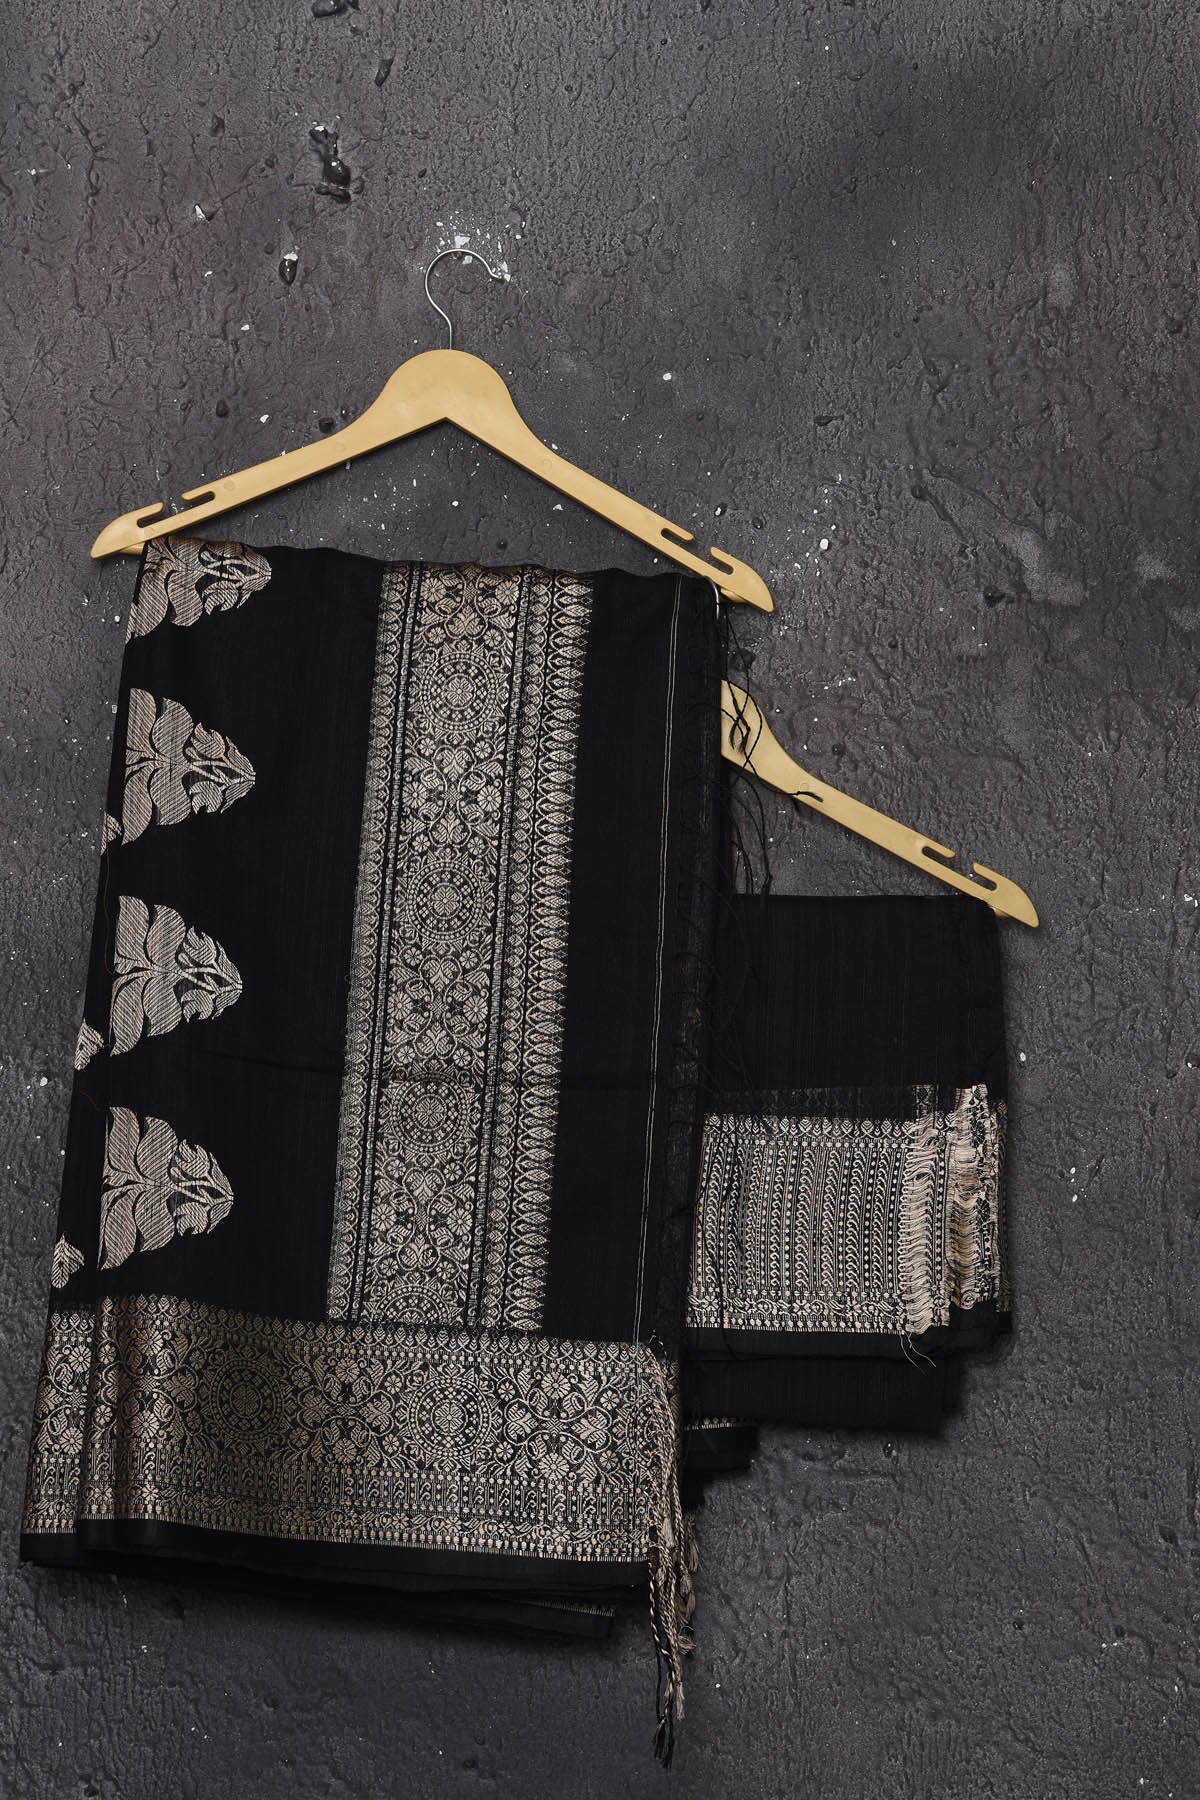 Buy elegant black zari woven matka Silk Banarasi saree with zari broad border online in USA which has crafted by skilled weaver of Banaras with elegance and grace, this saree is definitely the epitome of beauty and a must have in your collection. Buy designer handwoven banarasi brocade sari with any blouse from Pure Elegance Indian saree store in USA. -Unstitched blouse.